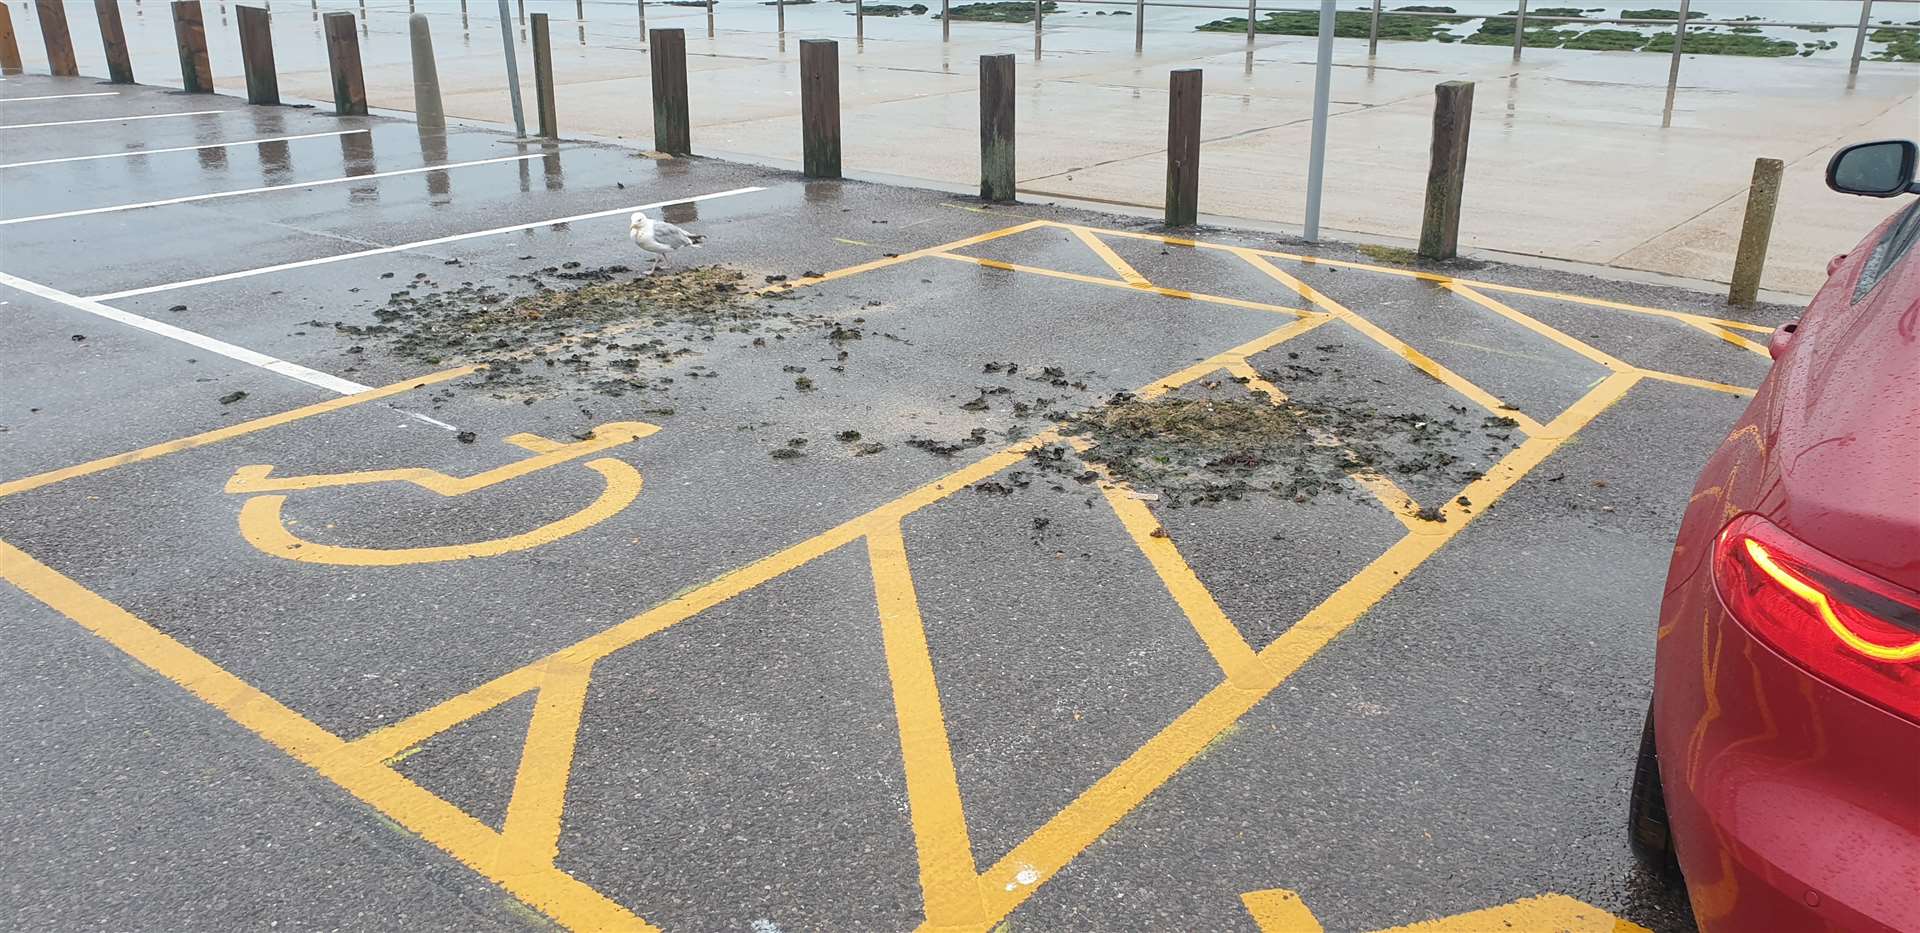 The horse manure left over a disabled bay. Picture: Iain MacDonald